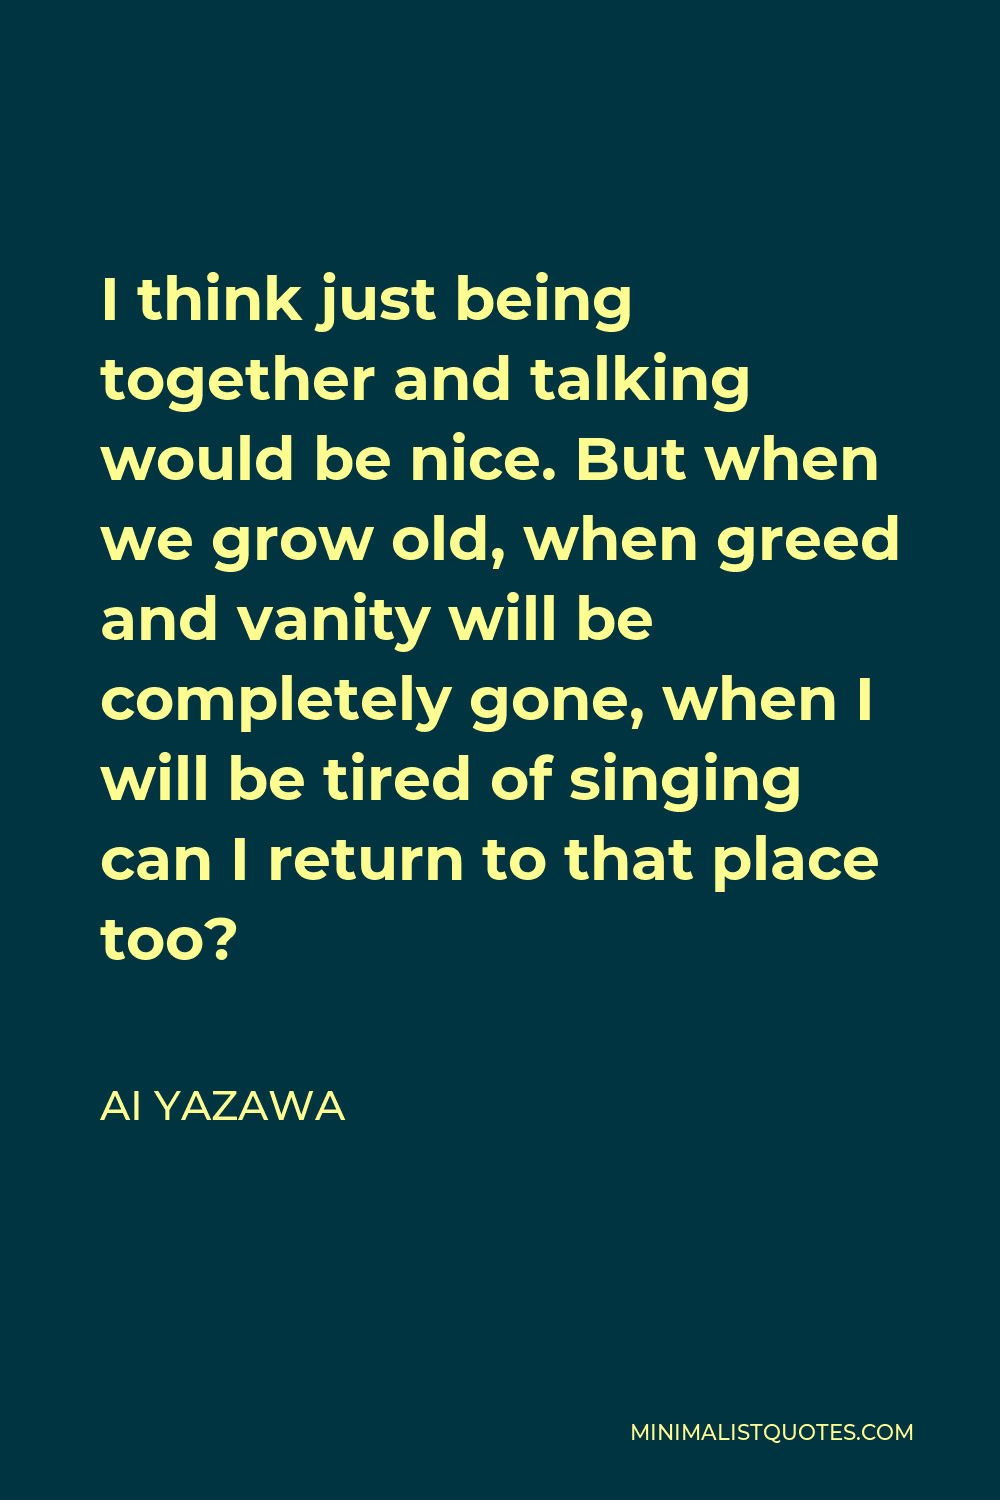 Ai Yazawa Quote - I think just being together and talking would be nice. But when we grow old, when greed and vanity will be completely gone, when I will be tired of singing can I return to that place too?